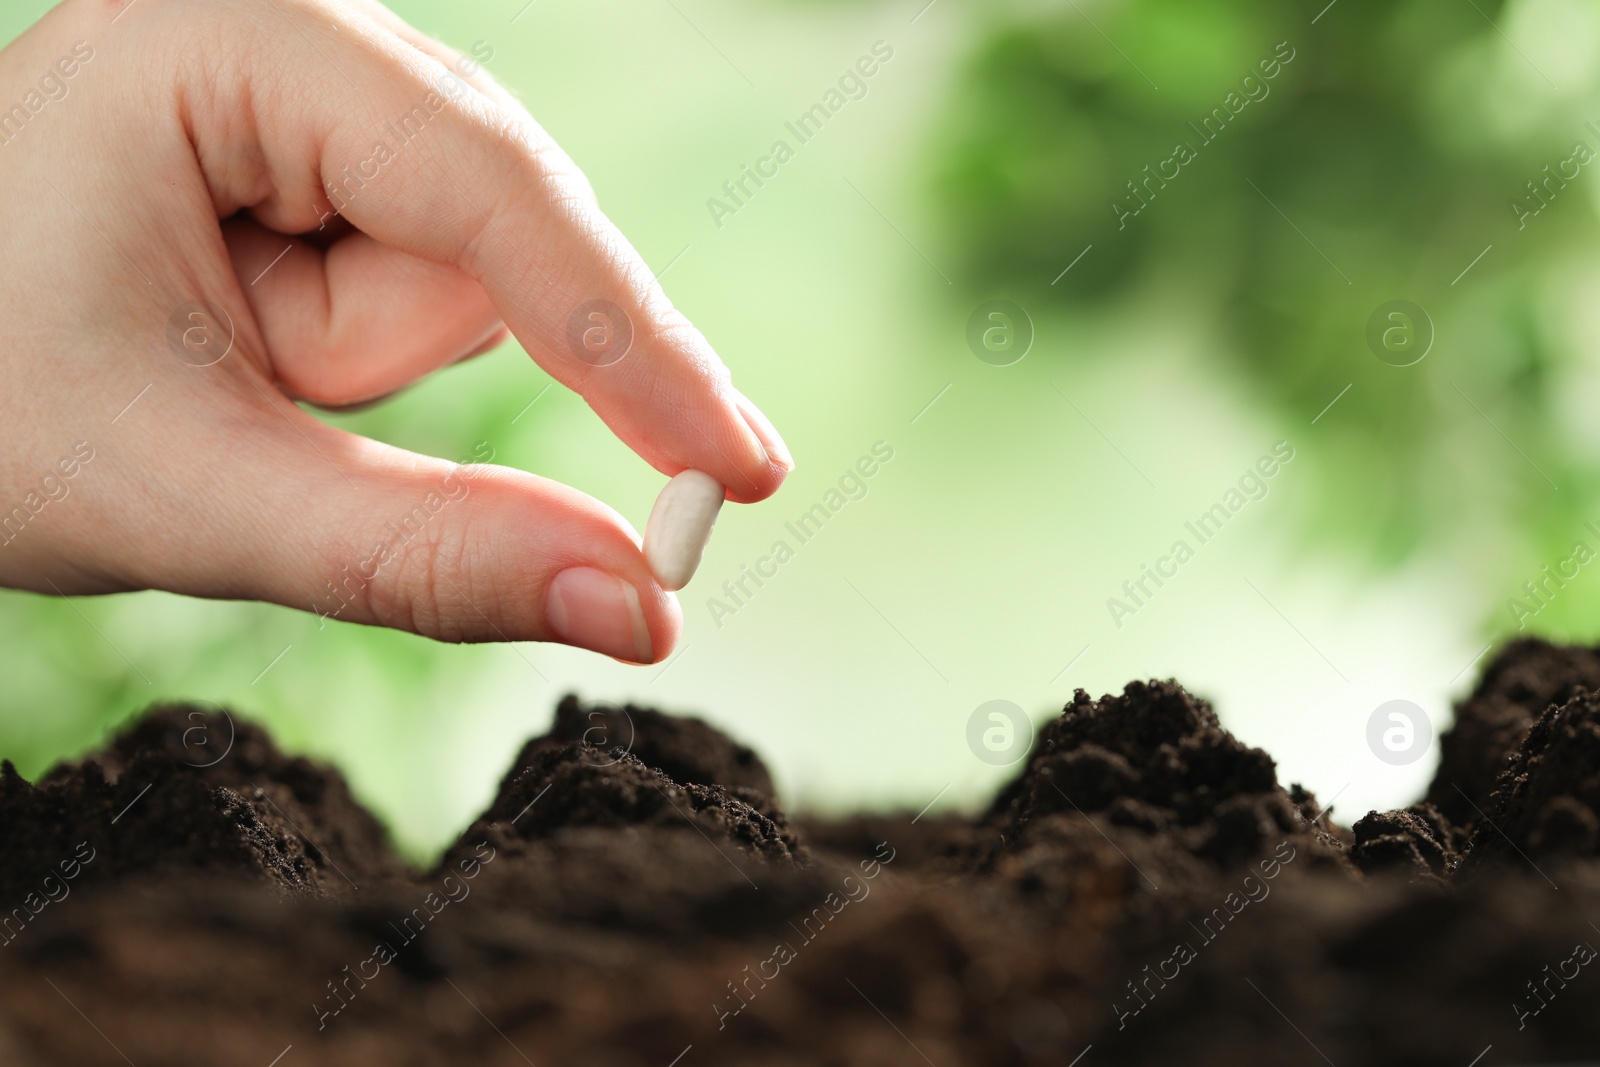 Photo of Woman putting bean into fertile soil against blurred background, closeup with space for text. Vegetable seed planting